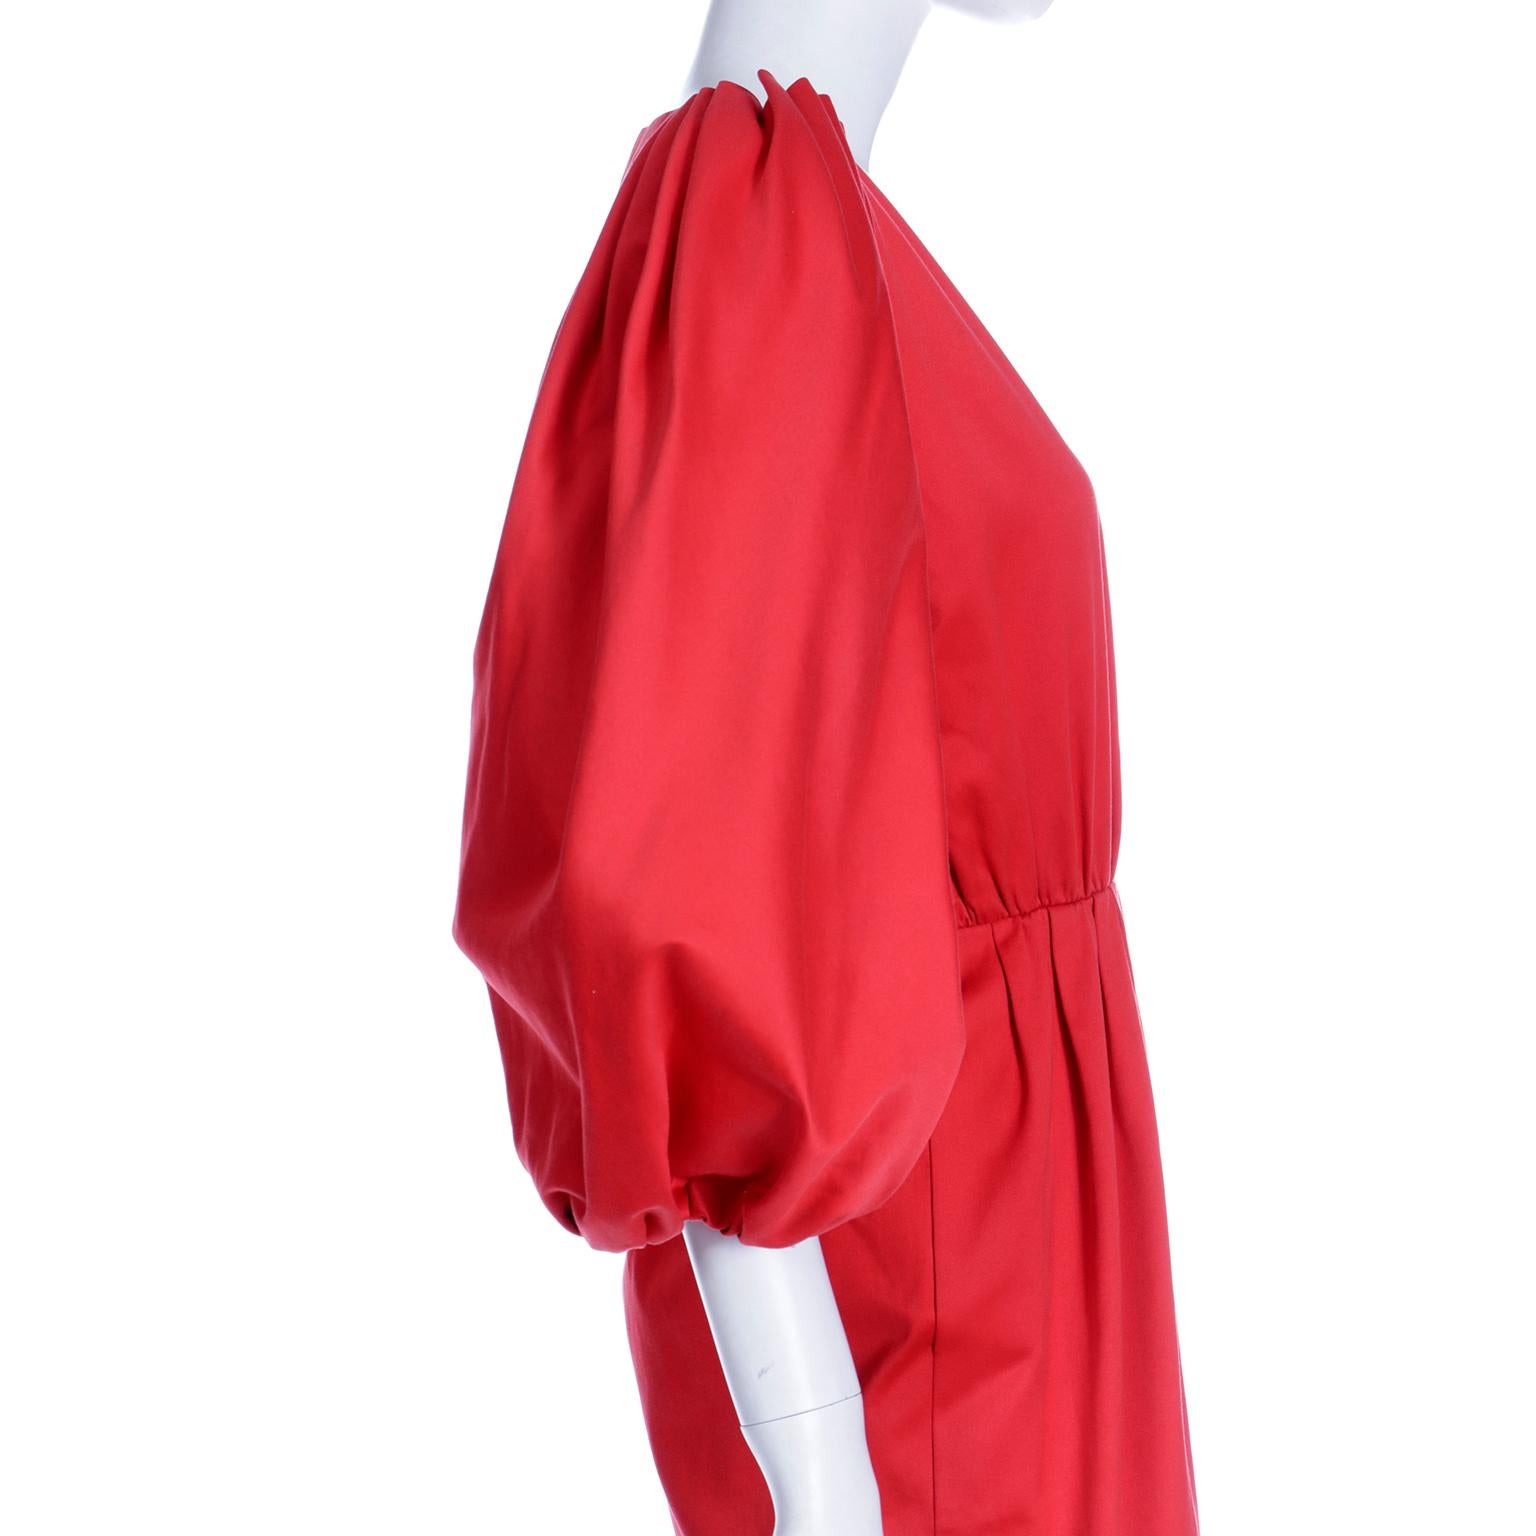 Yves Saint Laurent 1989 Vintage Red Runway Dress with Puff Statement Sleeves 10